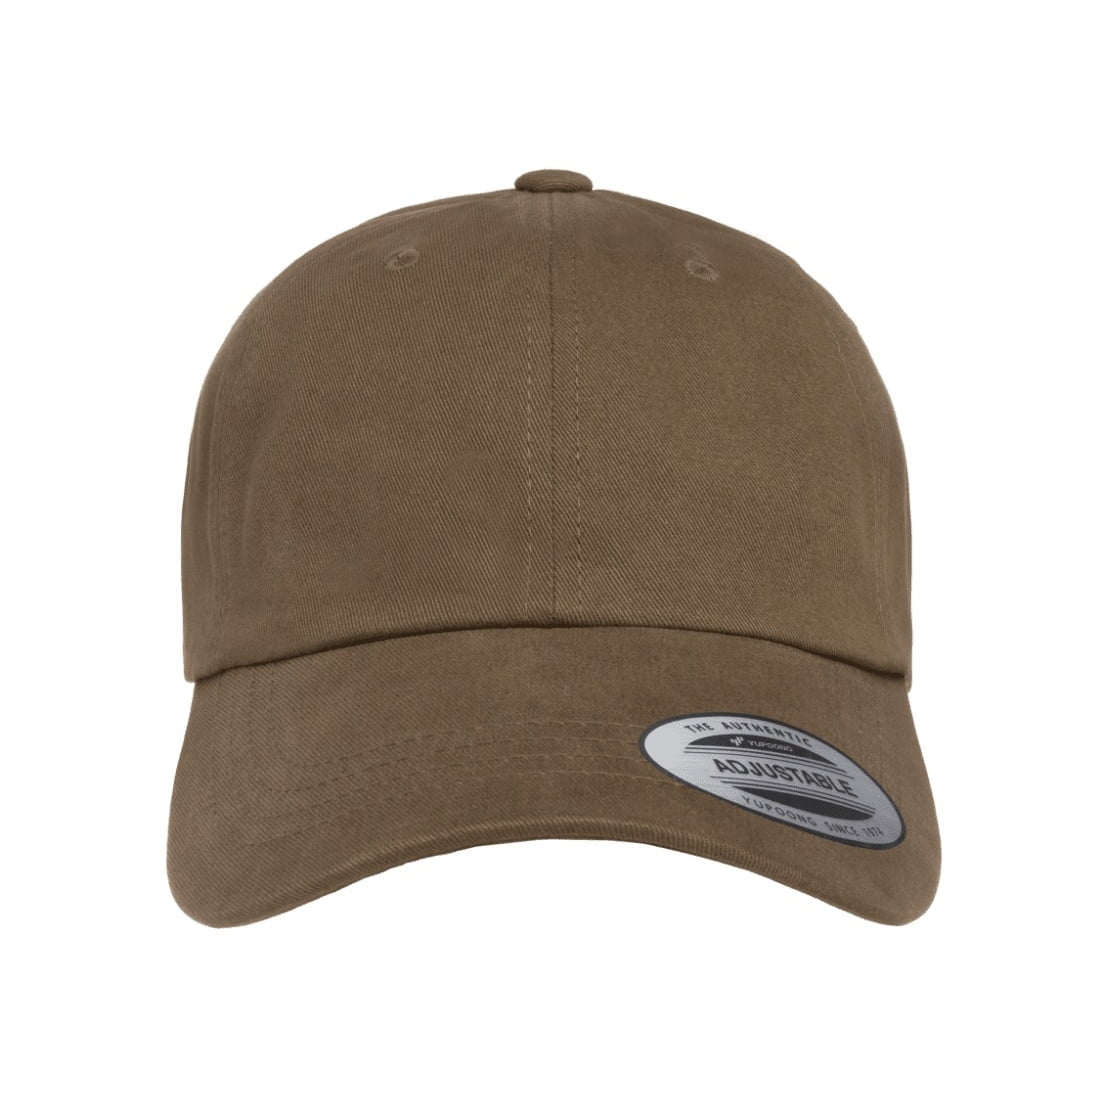 Flexfit By Yupoong Peached Cotton Cap Twill Dad